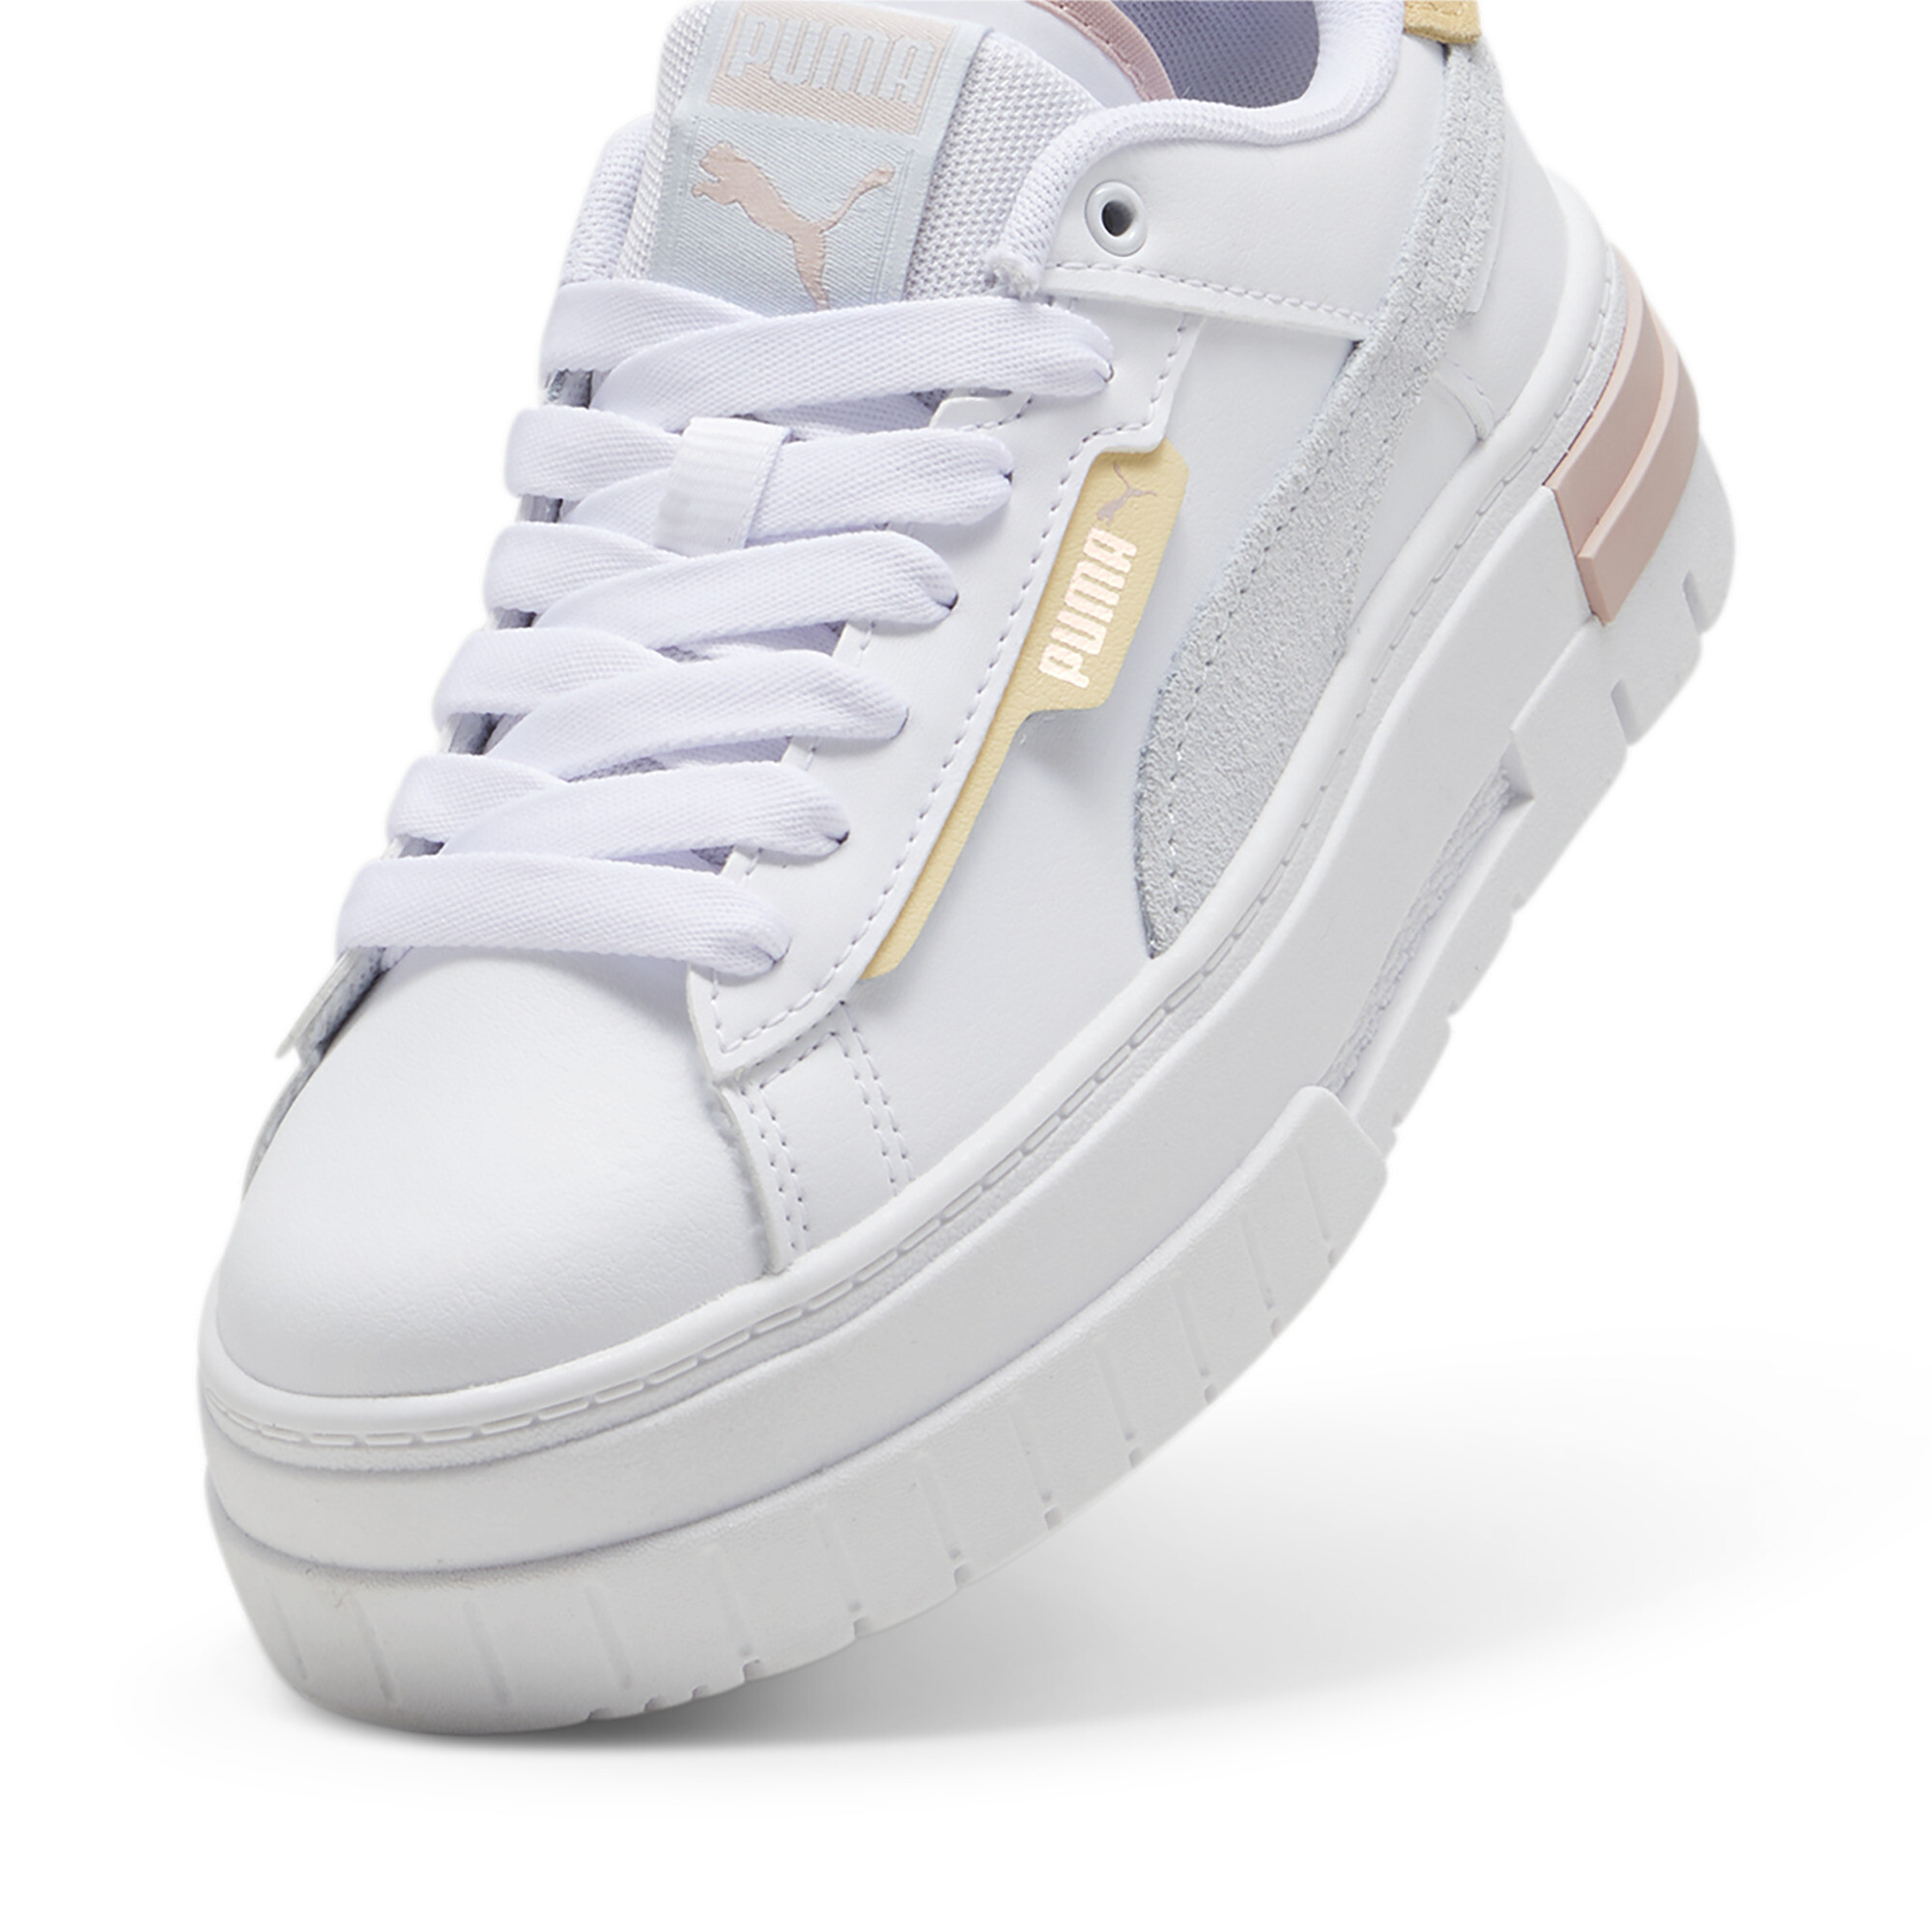 Women's Puma Mayze Crashed Youth Sneakers, White, Size 37, Shoes